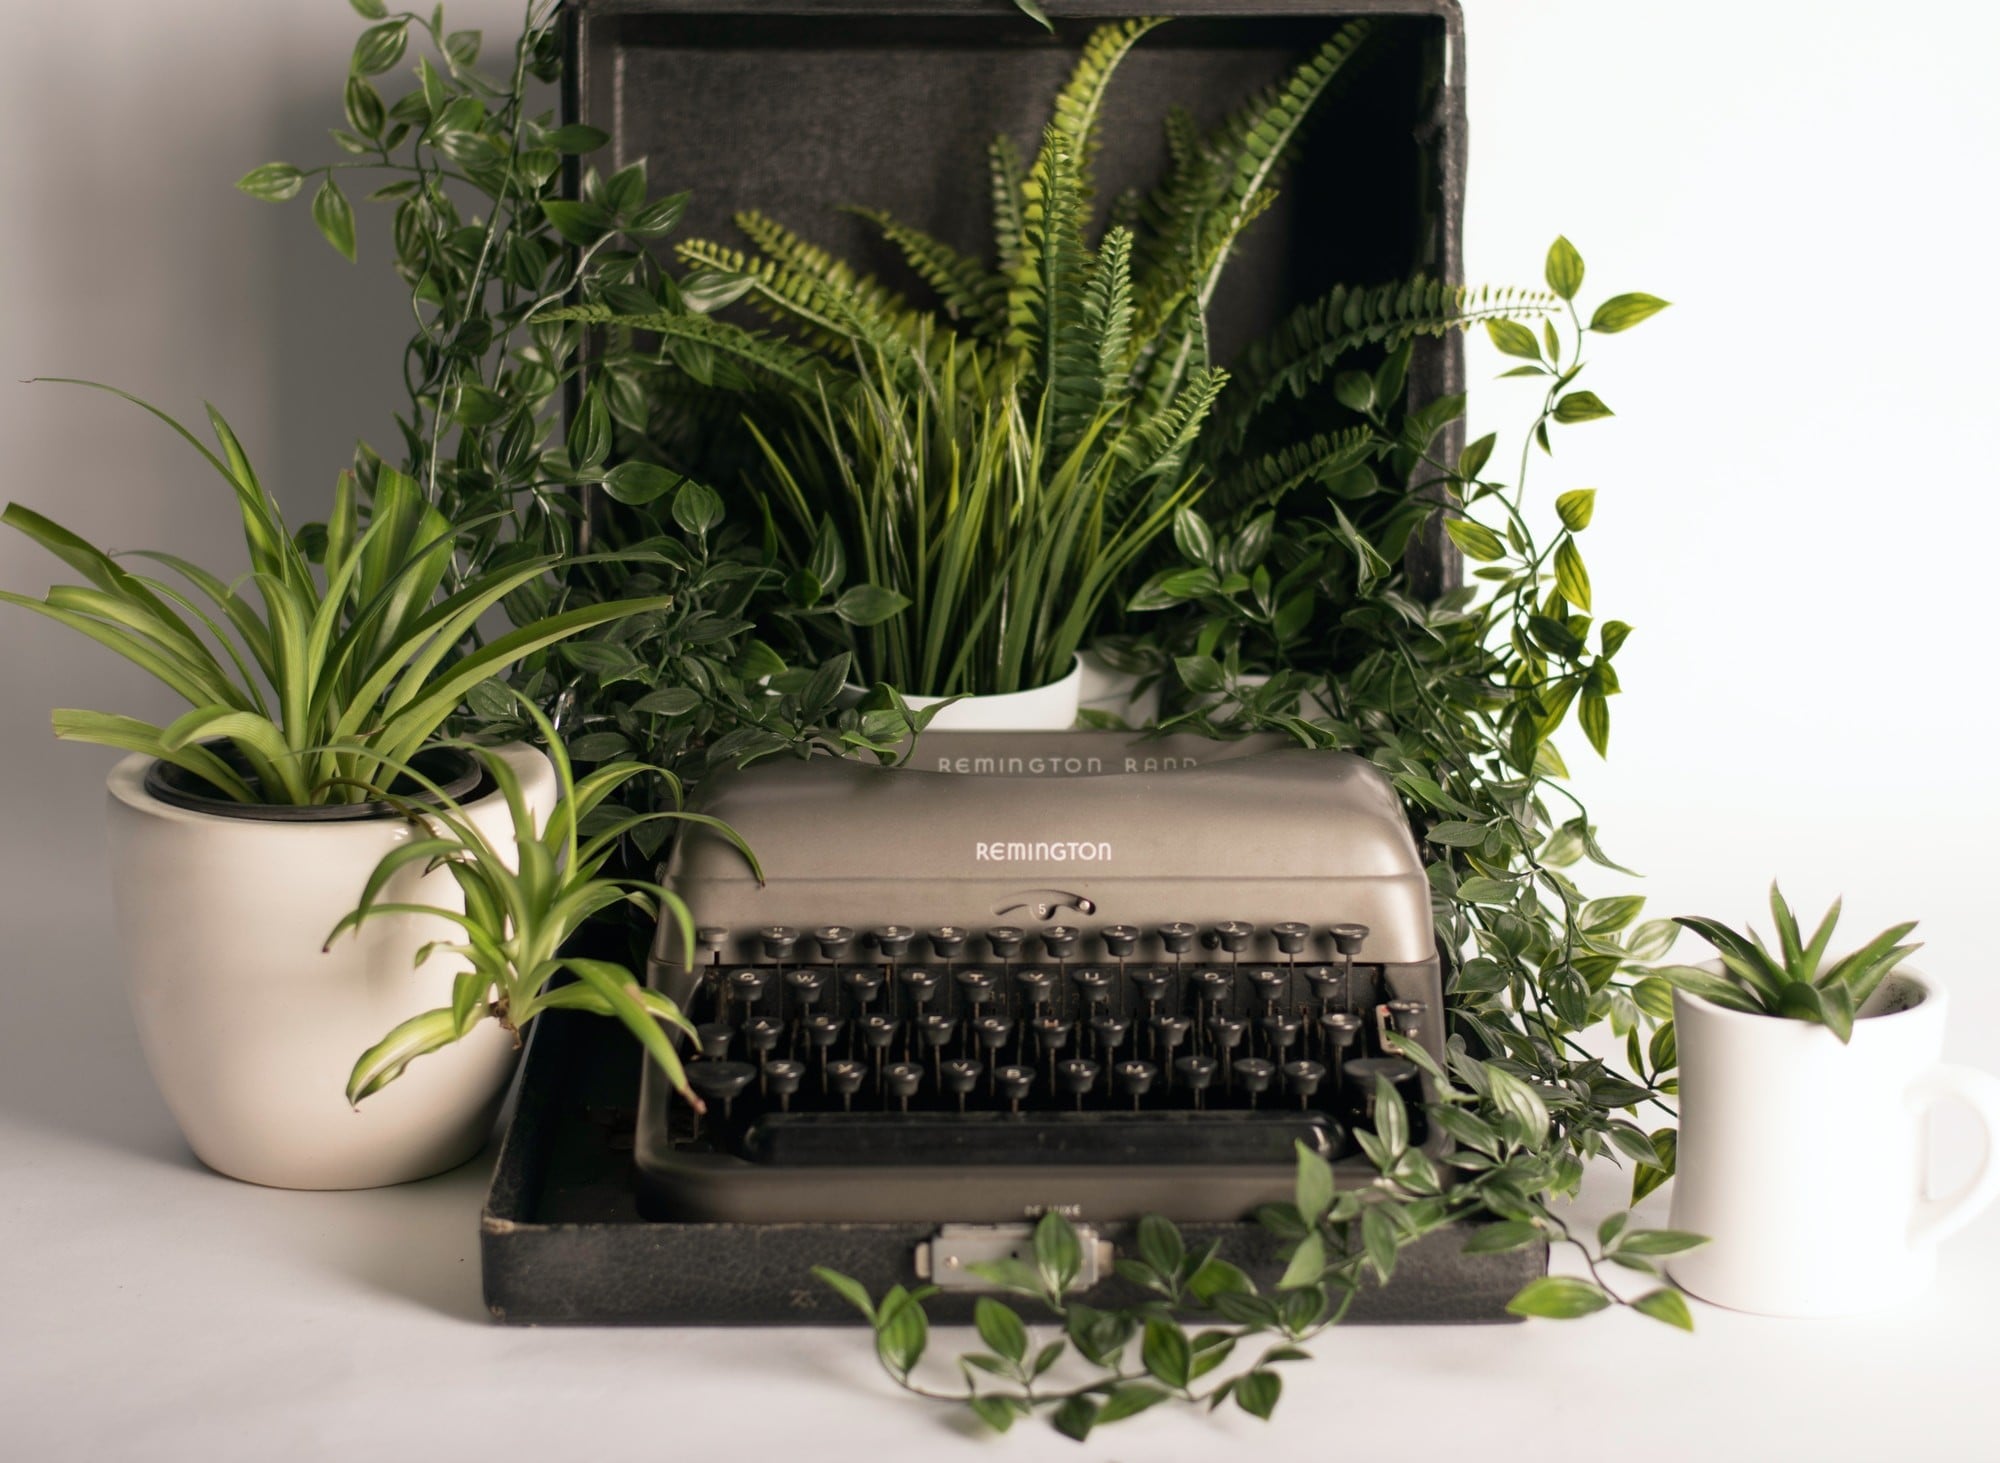 Bright photo displaying an antique typwriter in an open case surrounded by and enveloped in leafy houseplants and greenery.